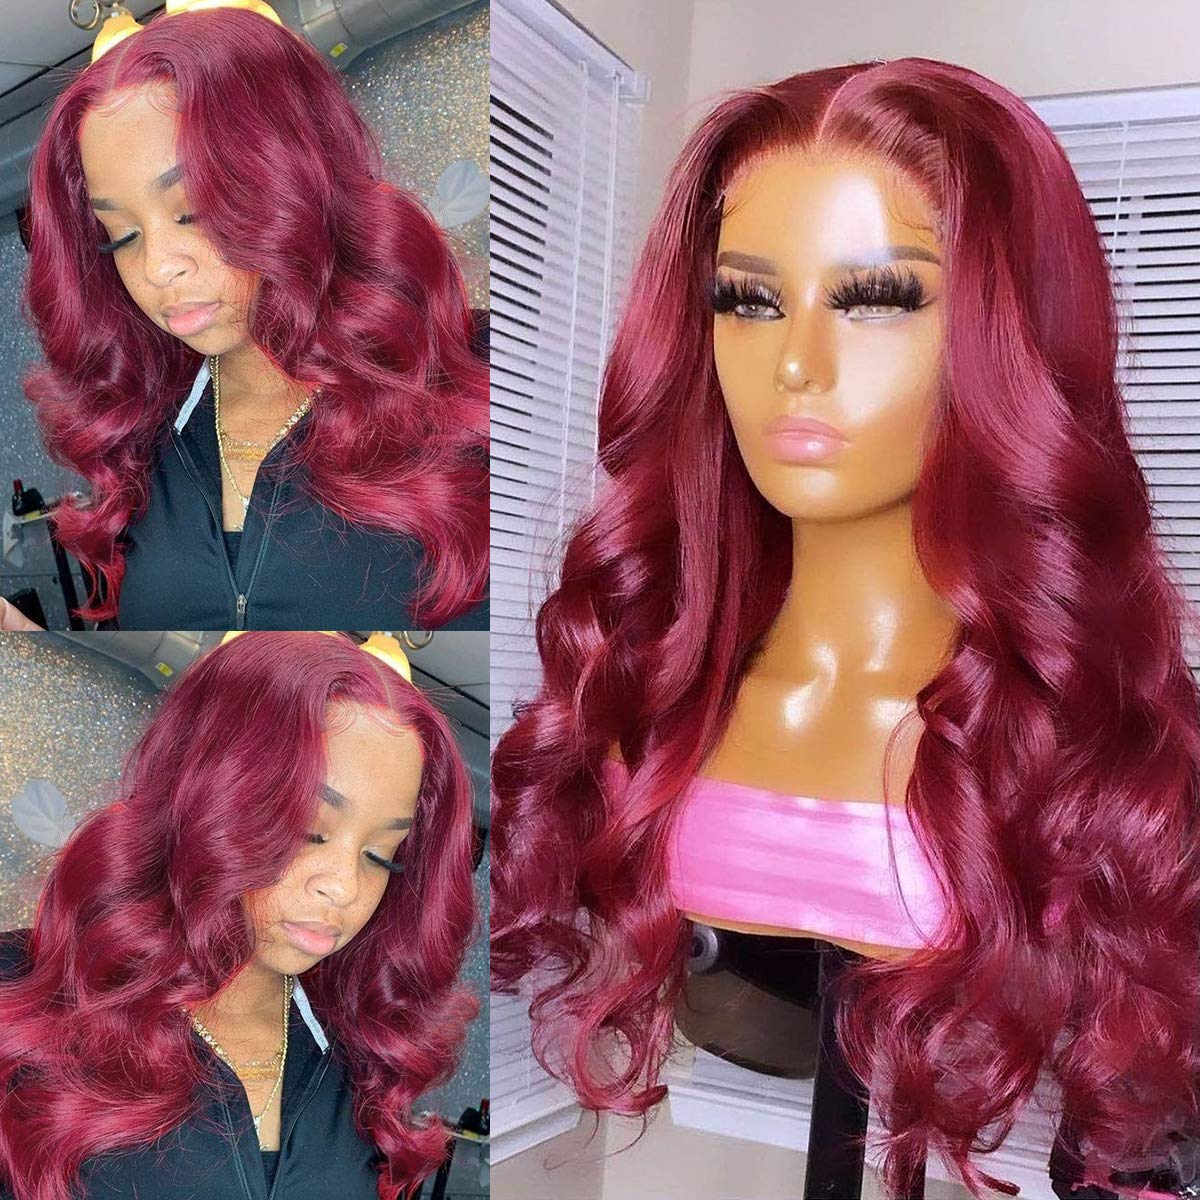 Gluna 4×4 5x5 Lace Closure Wig Burgundy Color Body Wave Human Virgin Hair Pre Plucked With Natural Baby Hair